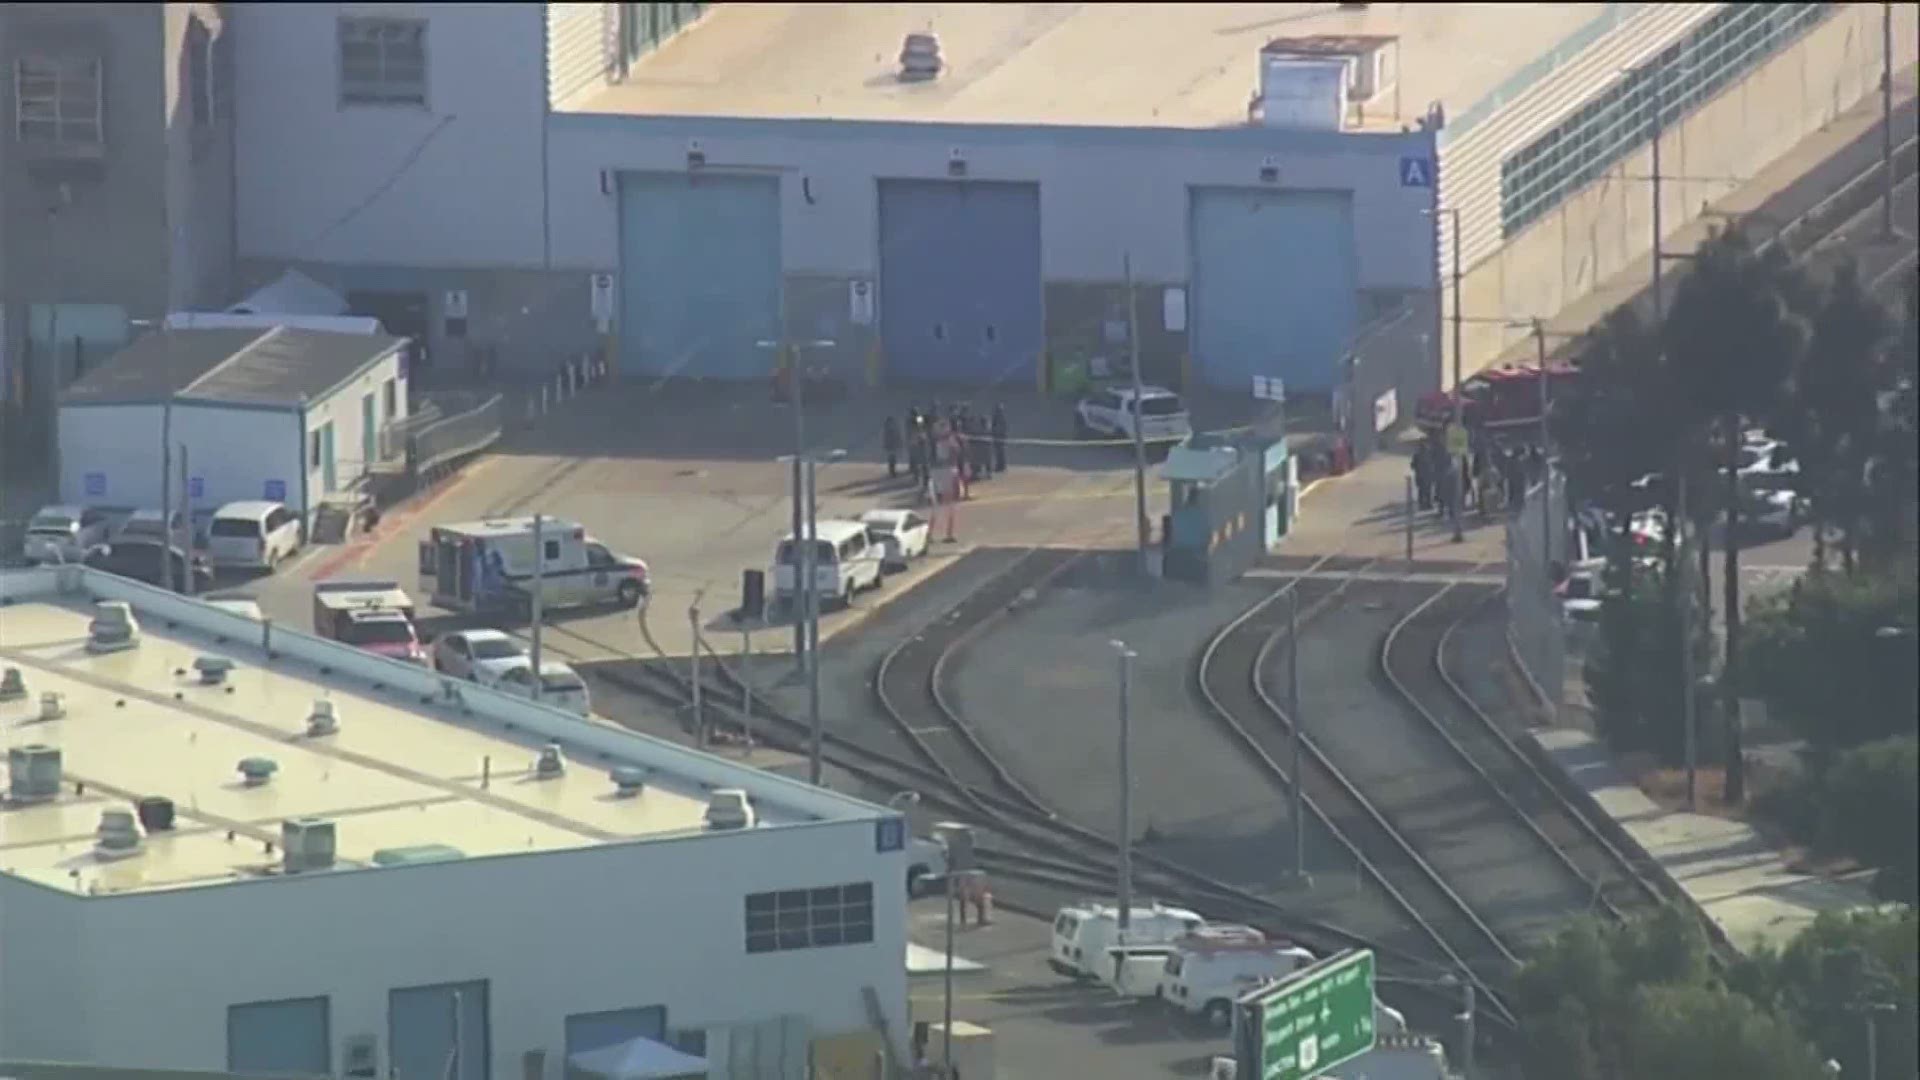 Authorities say the shooting took place Wednesday in San Jose at a transit control center that stores trains and has a maintenance yard.